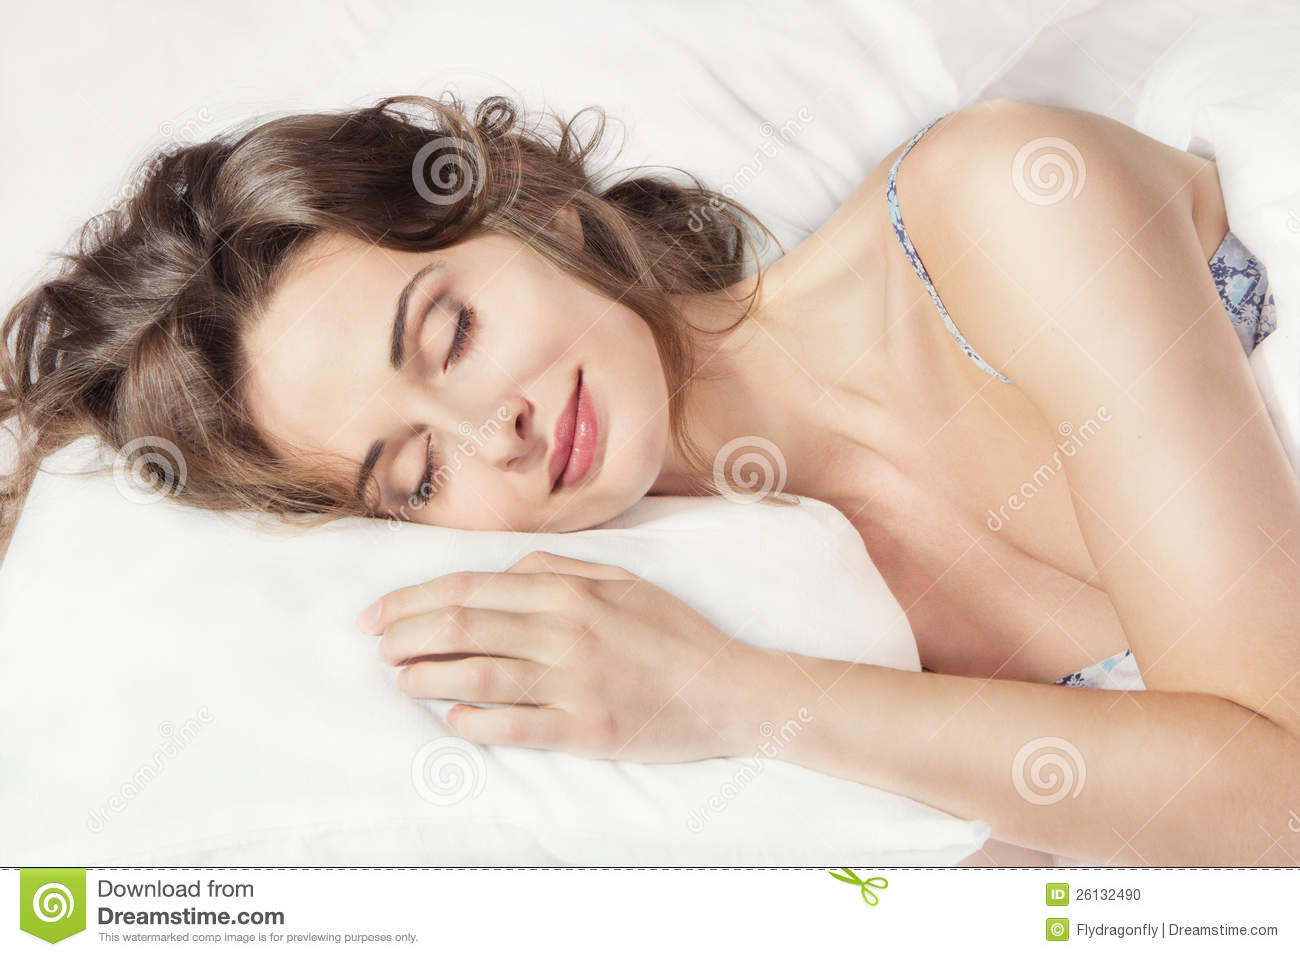 Woman Sleeping In The Bed Stock Photo   Image  26132490